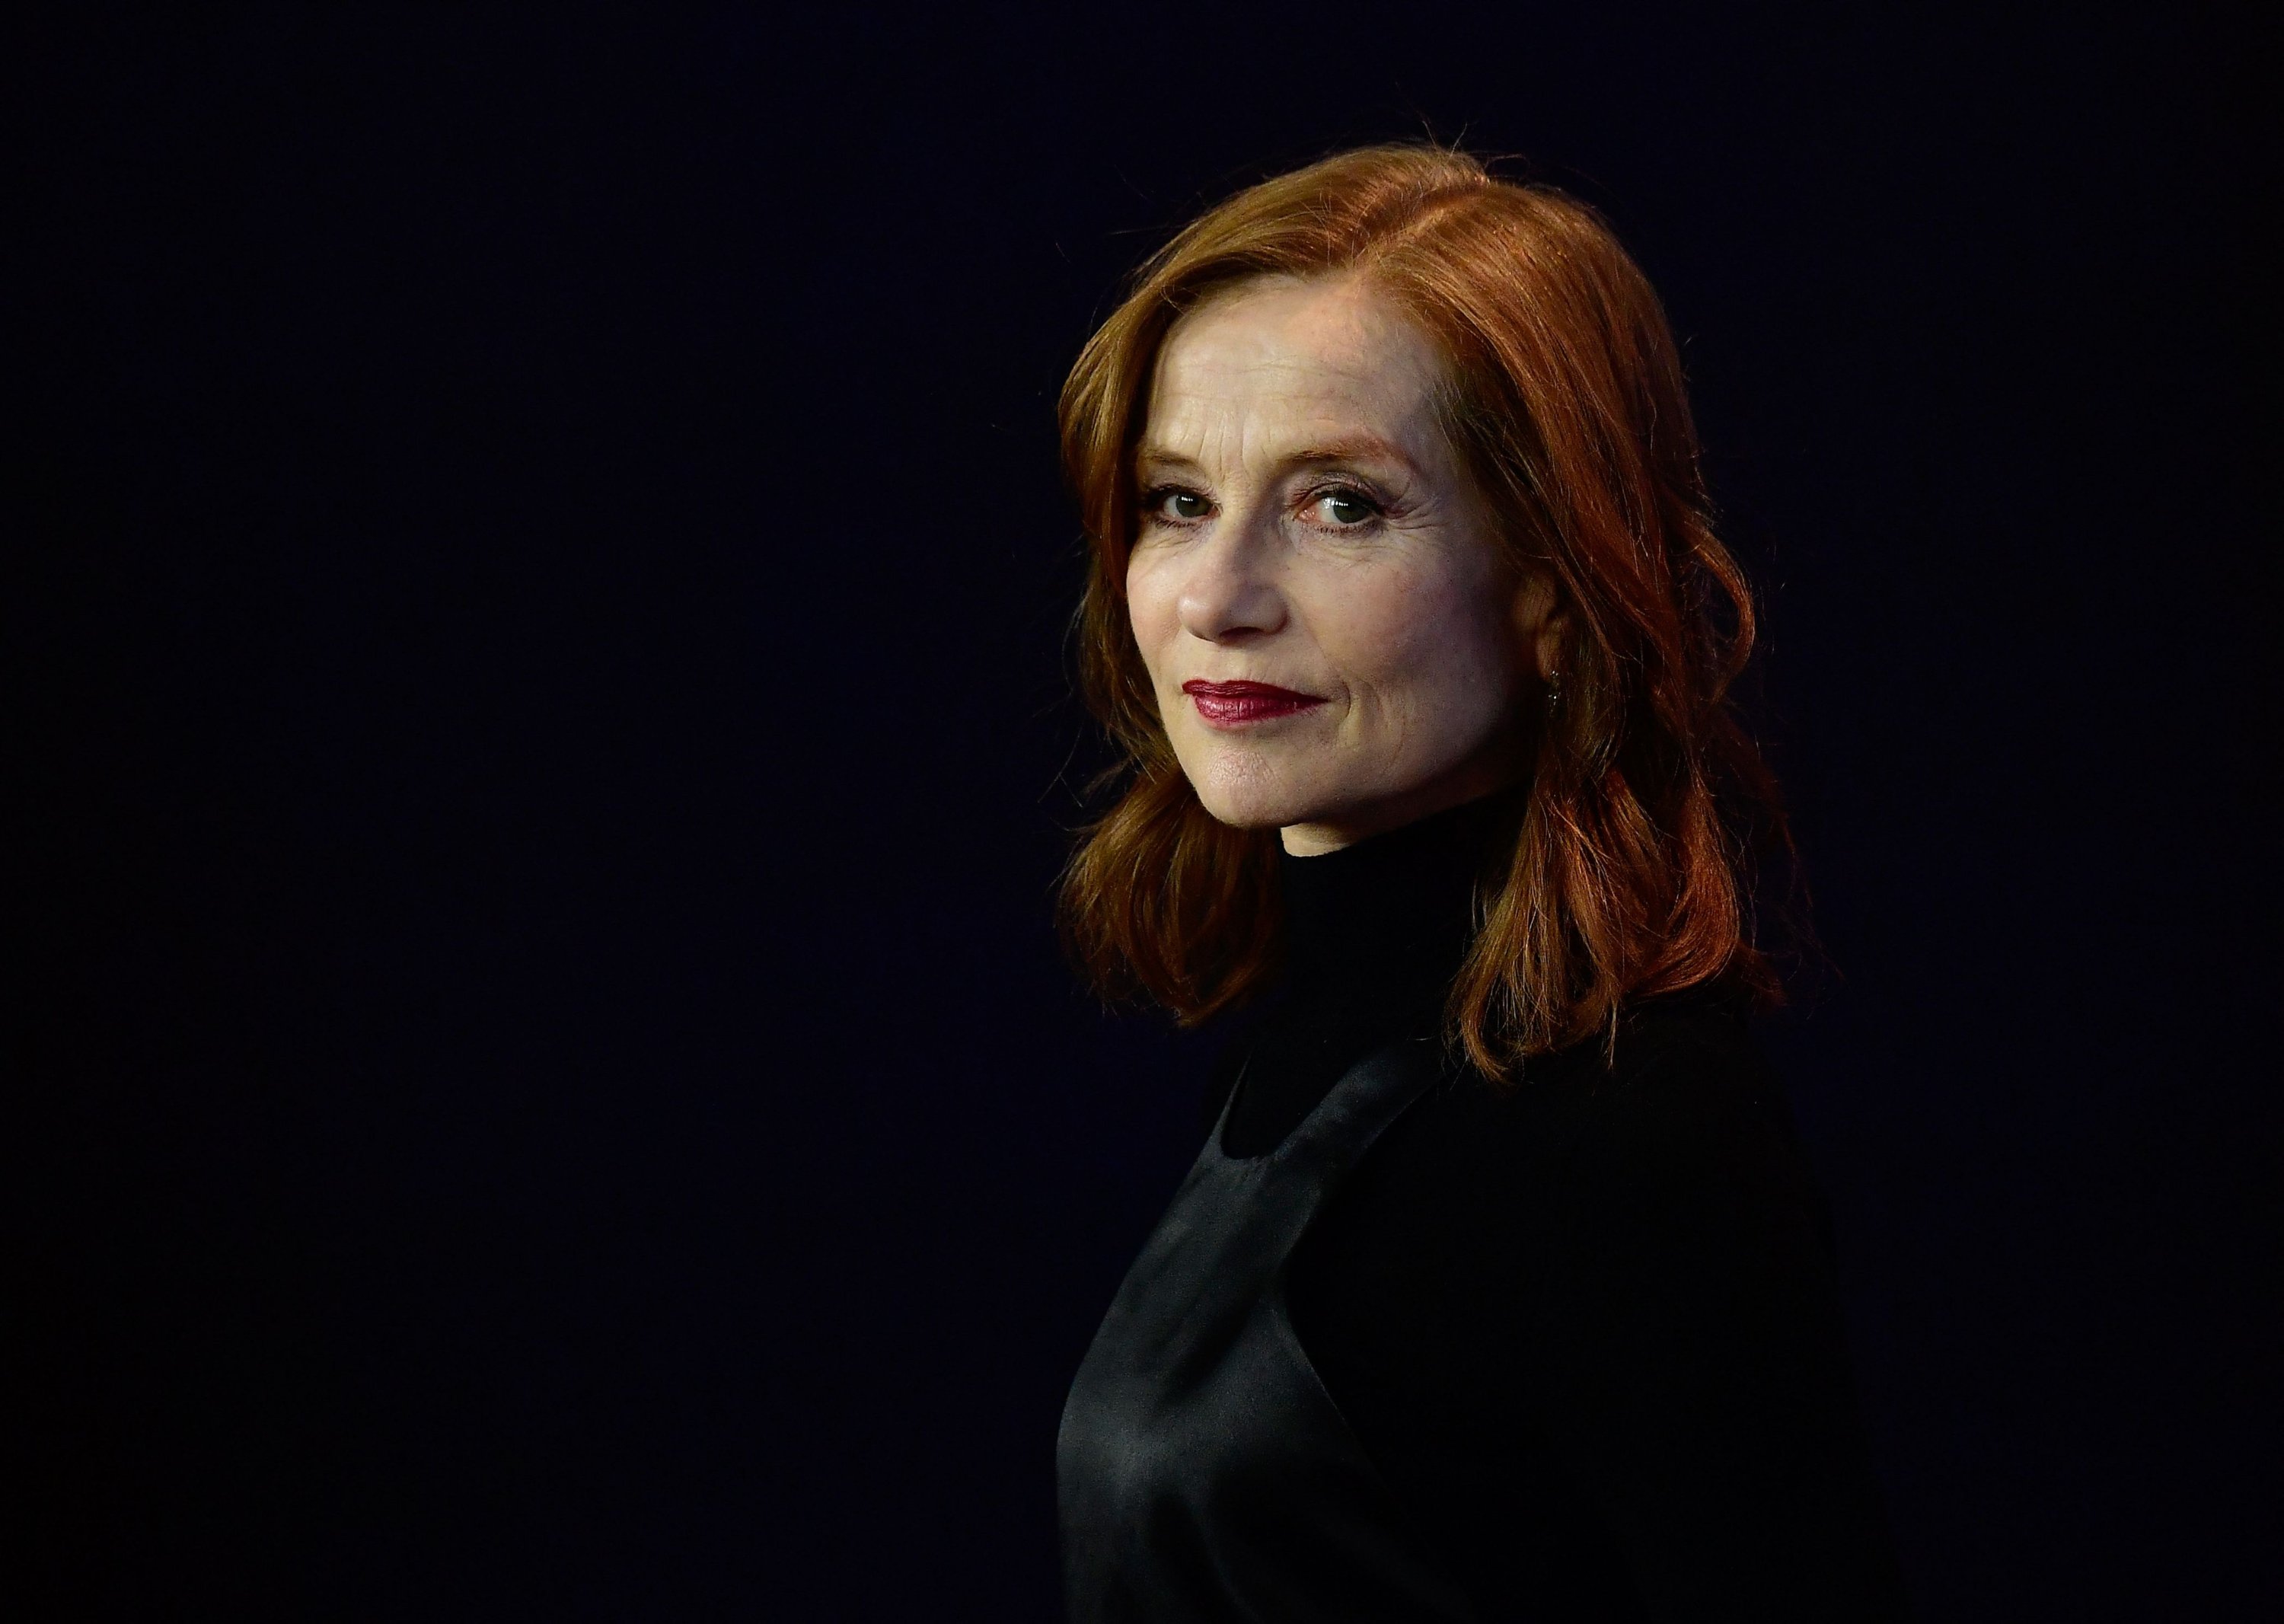 This file photo taken on Feb. 17, 2018, shows French actress Isabelle Huppert posing during a photocall for the film 